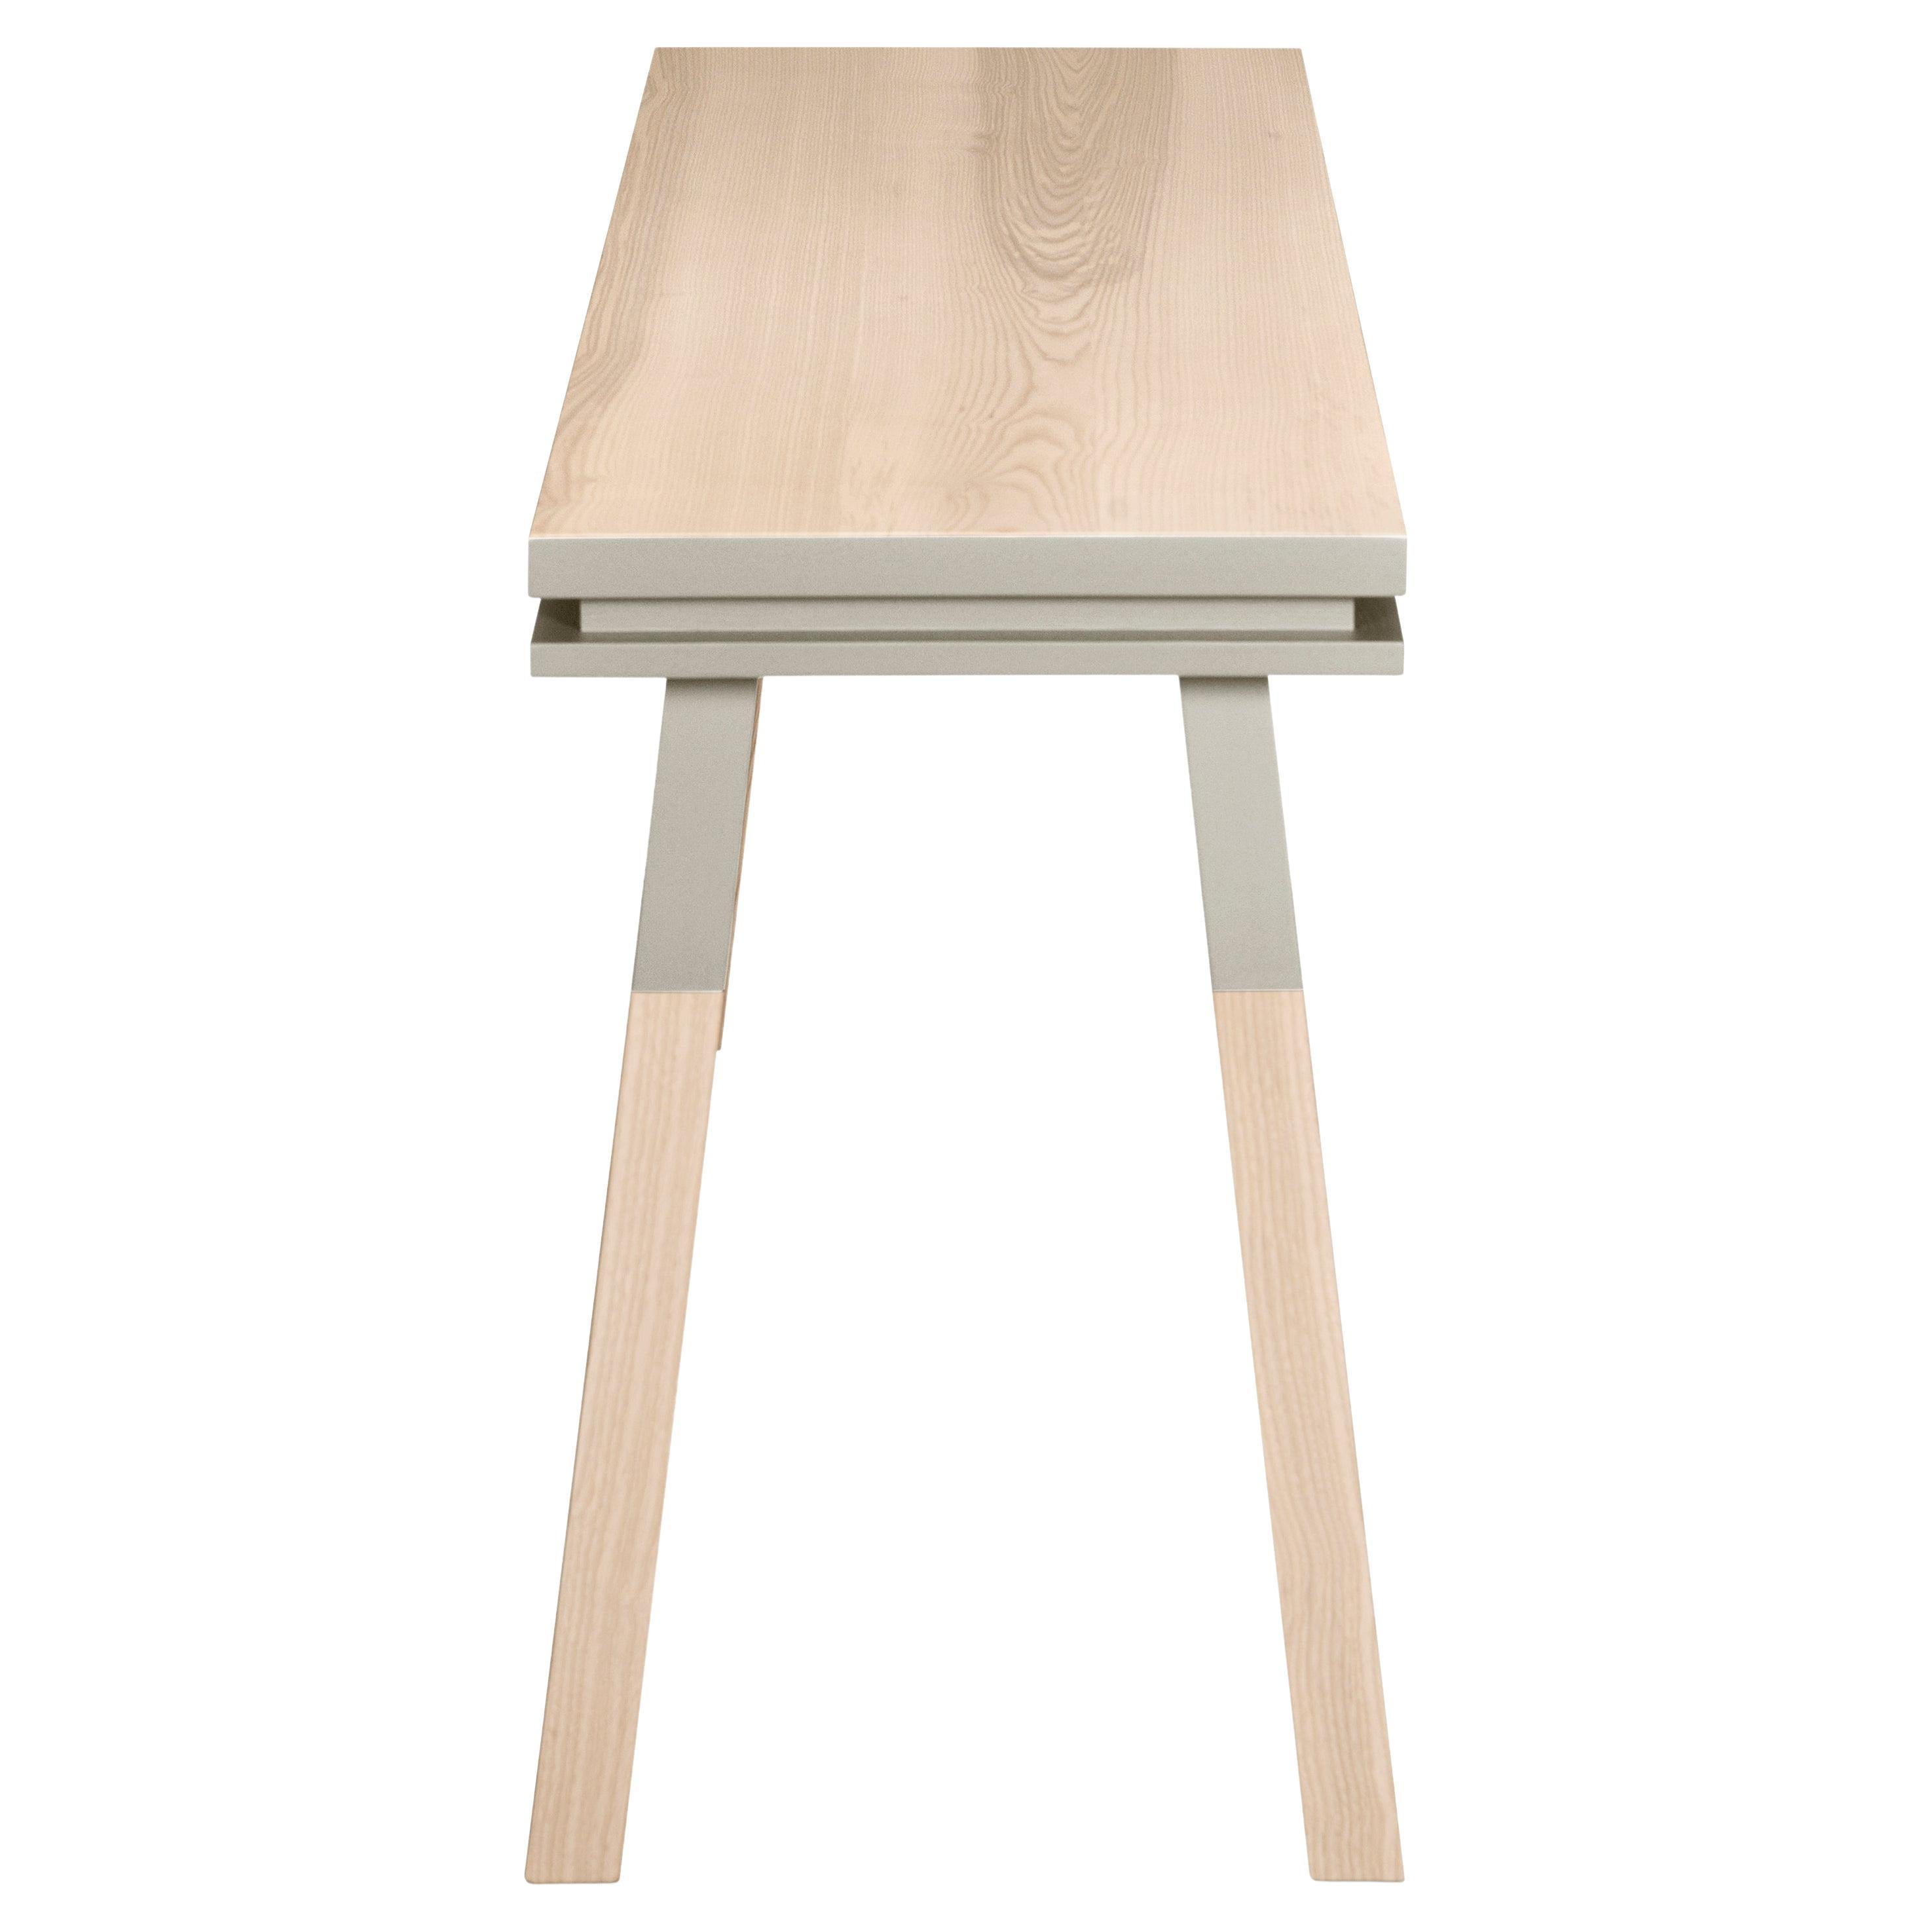 Grey table in solid wood, scandinavian design by E. Gizard, Paris - craft made For Sale